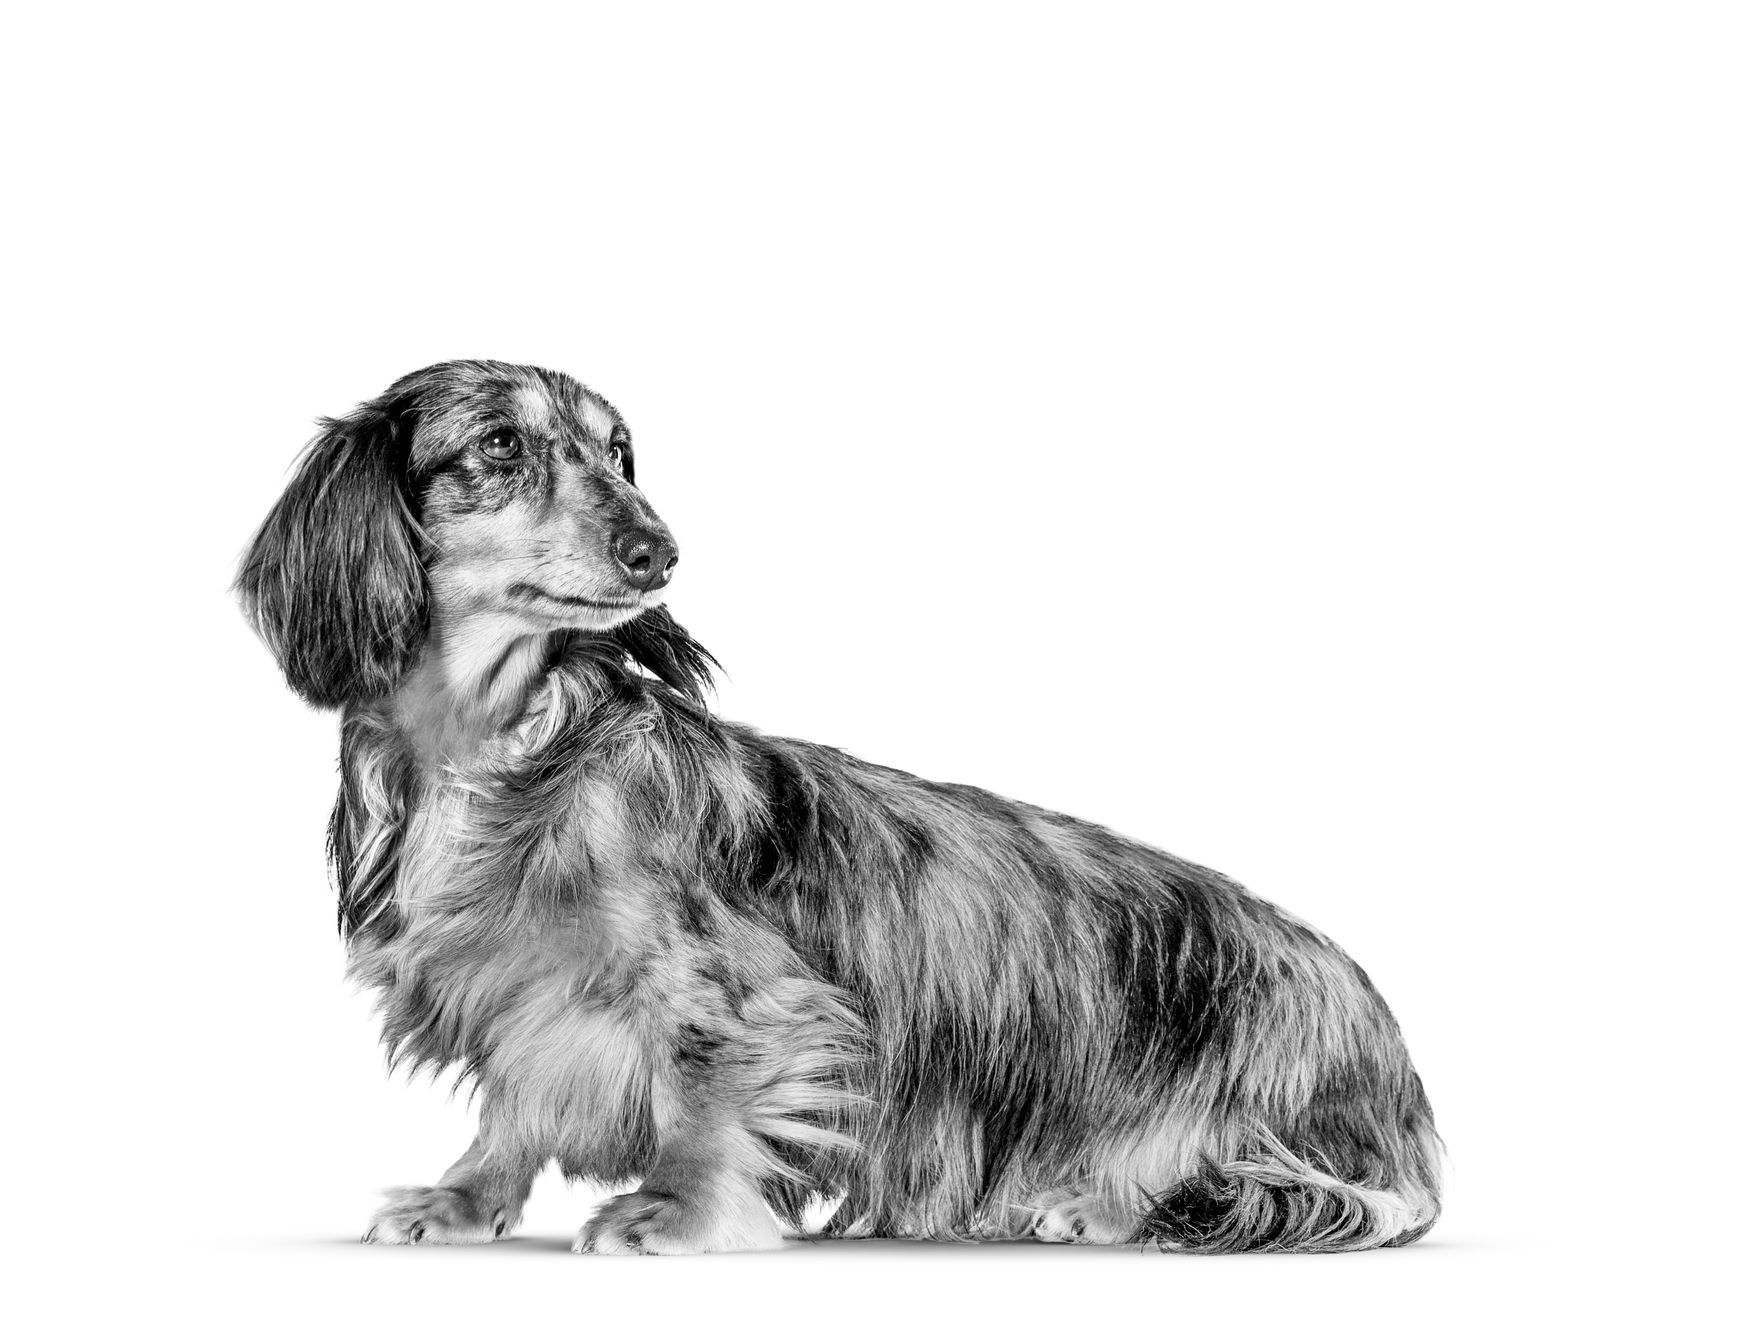 Dachshund lying down in black and white 